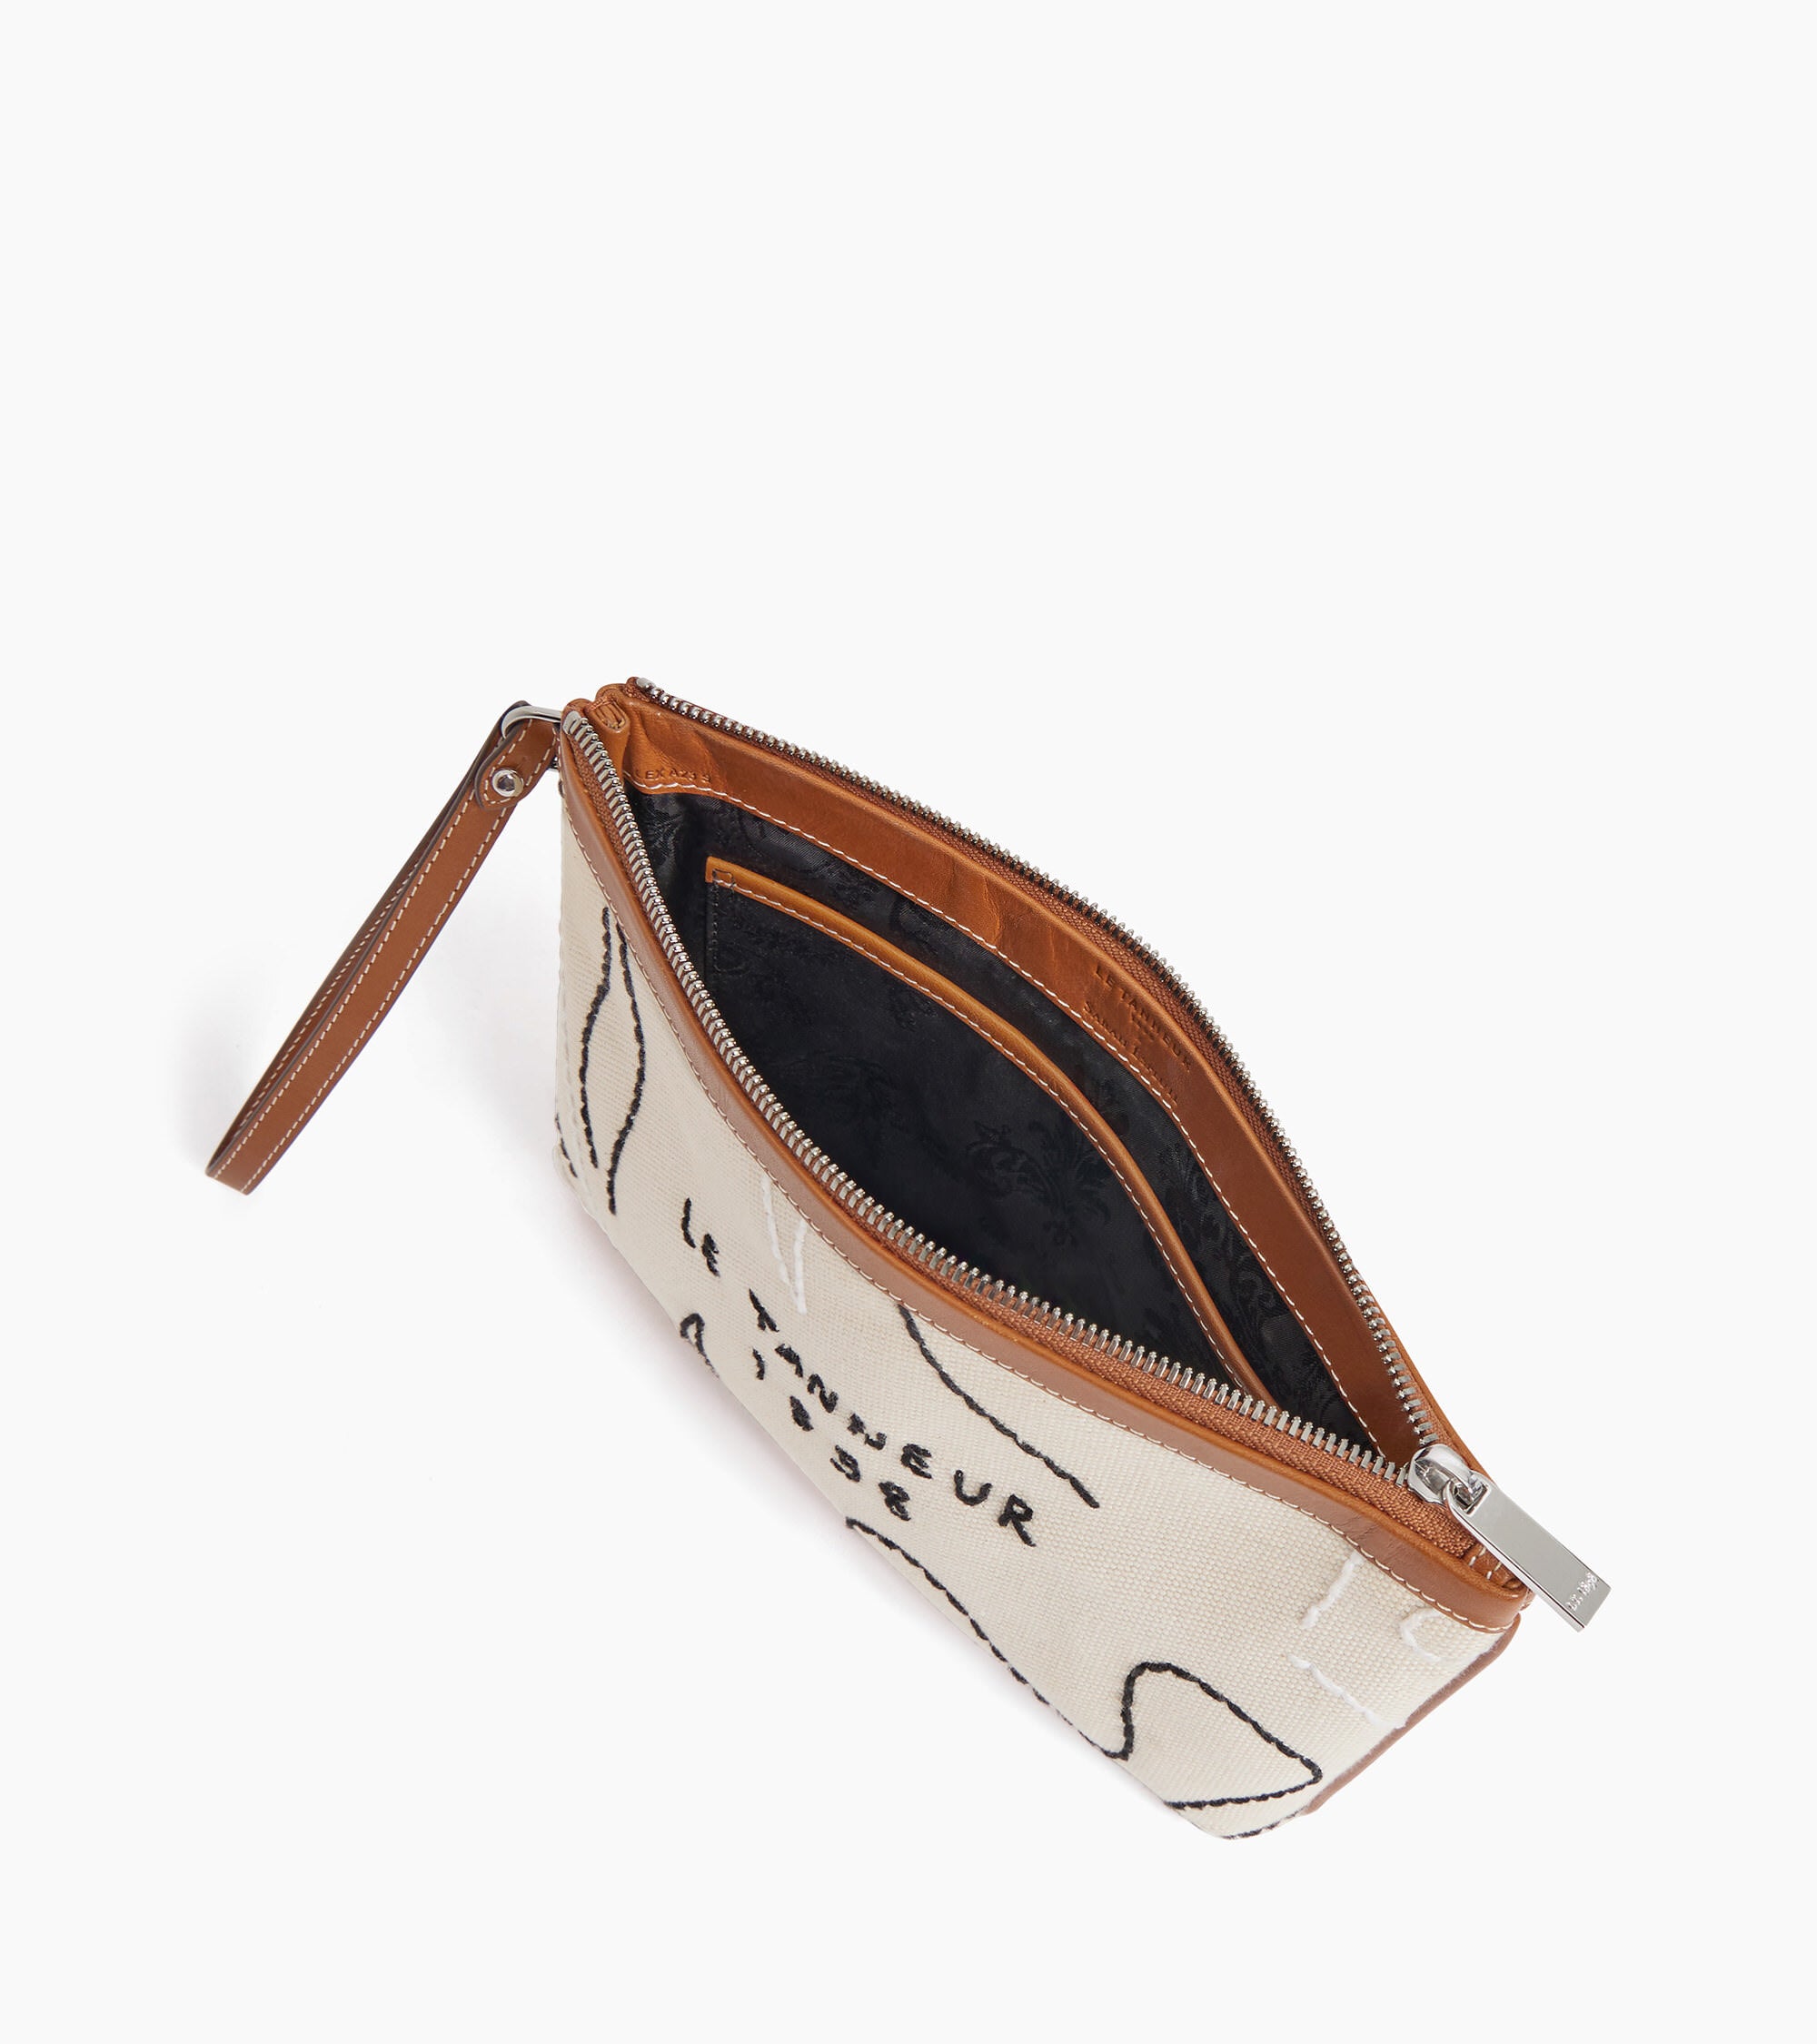 Sarah Espeute zippered clutch bag in semi-leather and cotton canvas